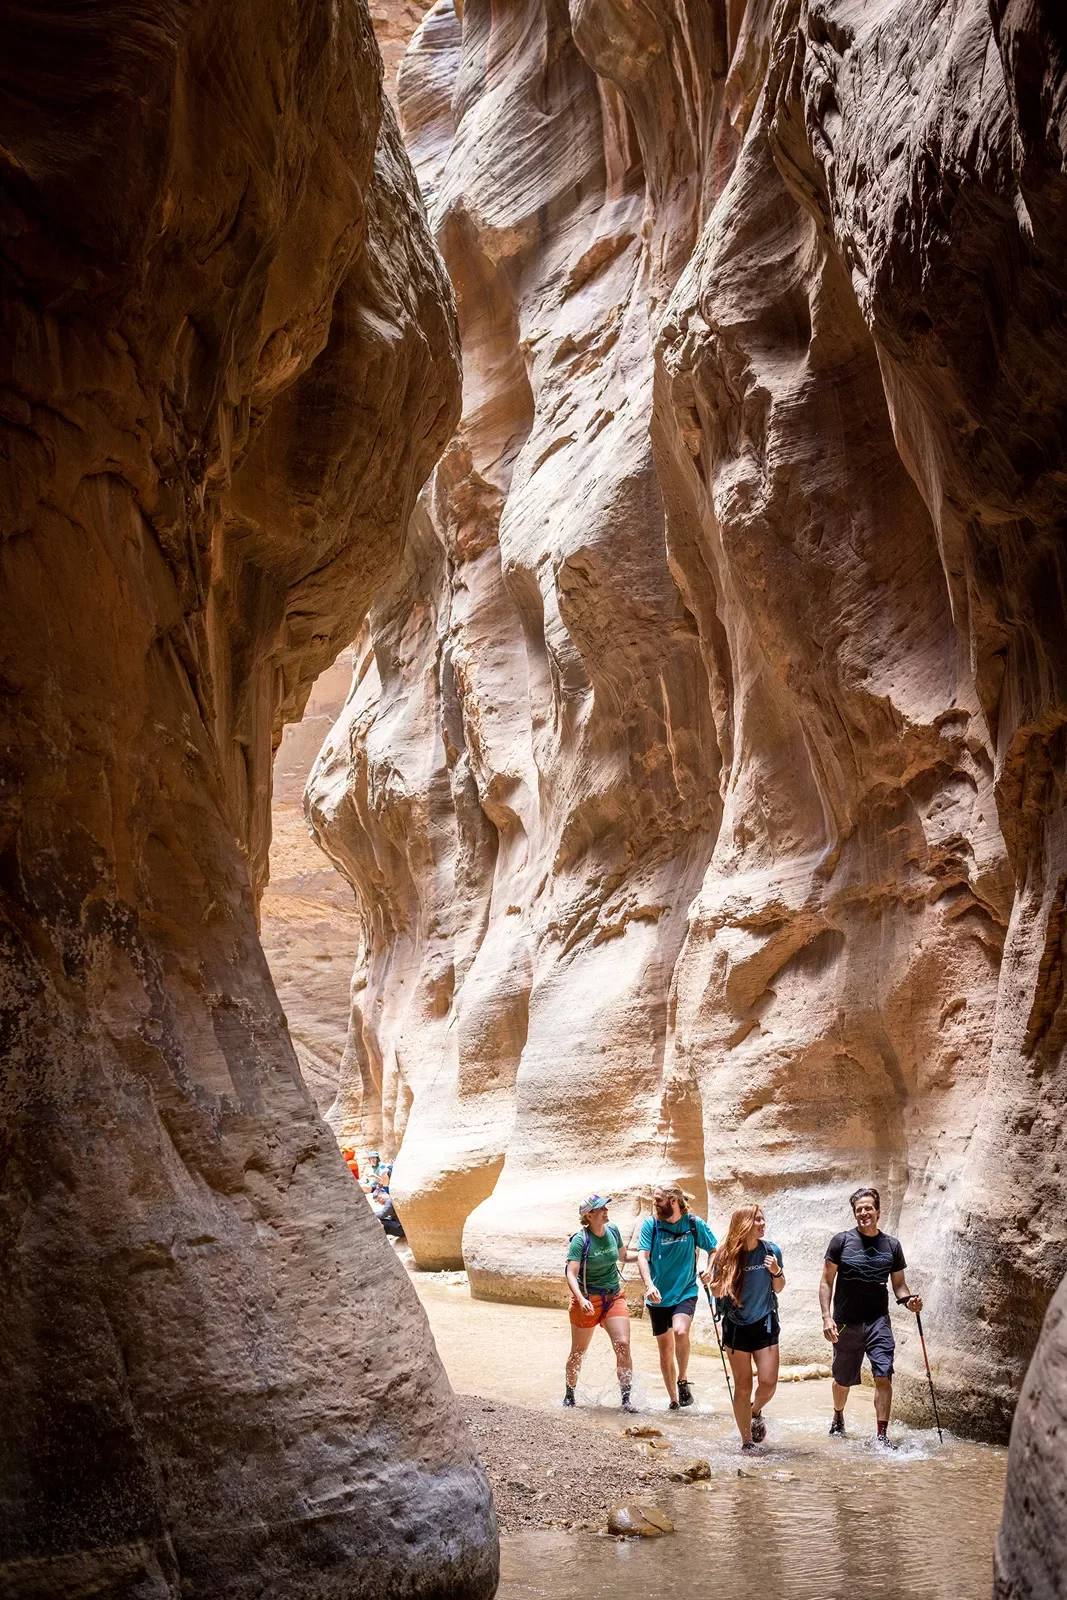 Hikers in the narrows of Zion Canyon